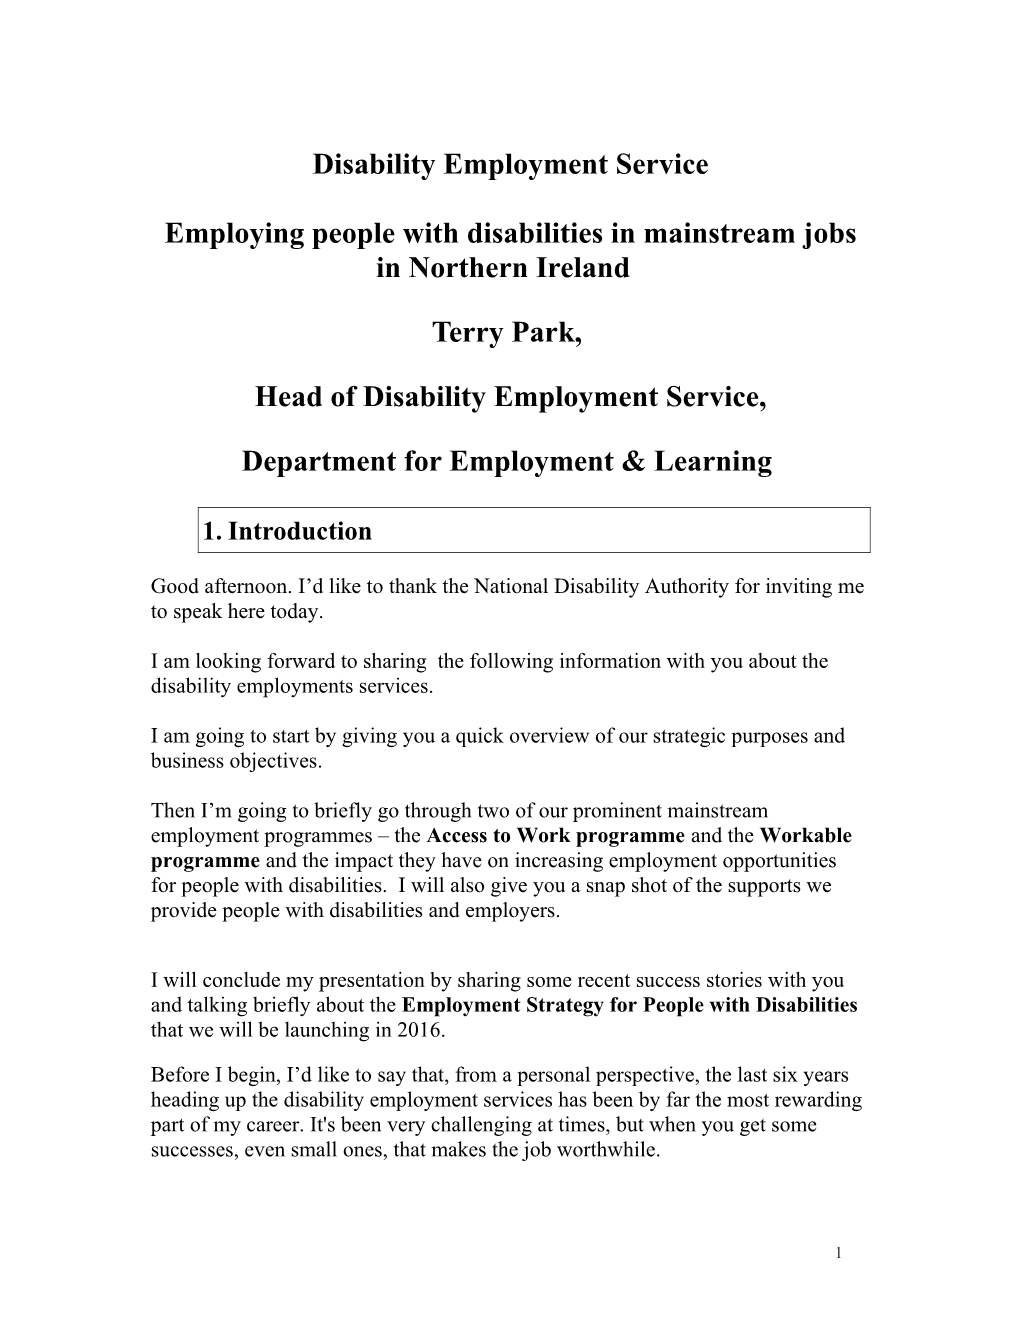 Head of Disability Employment Service